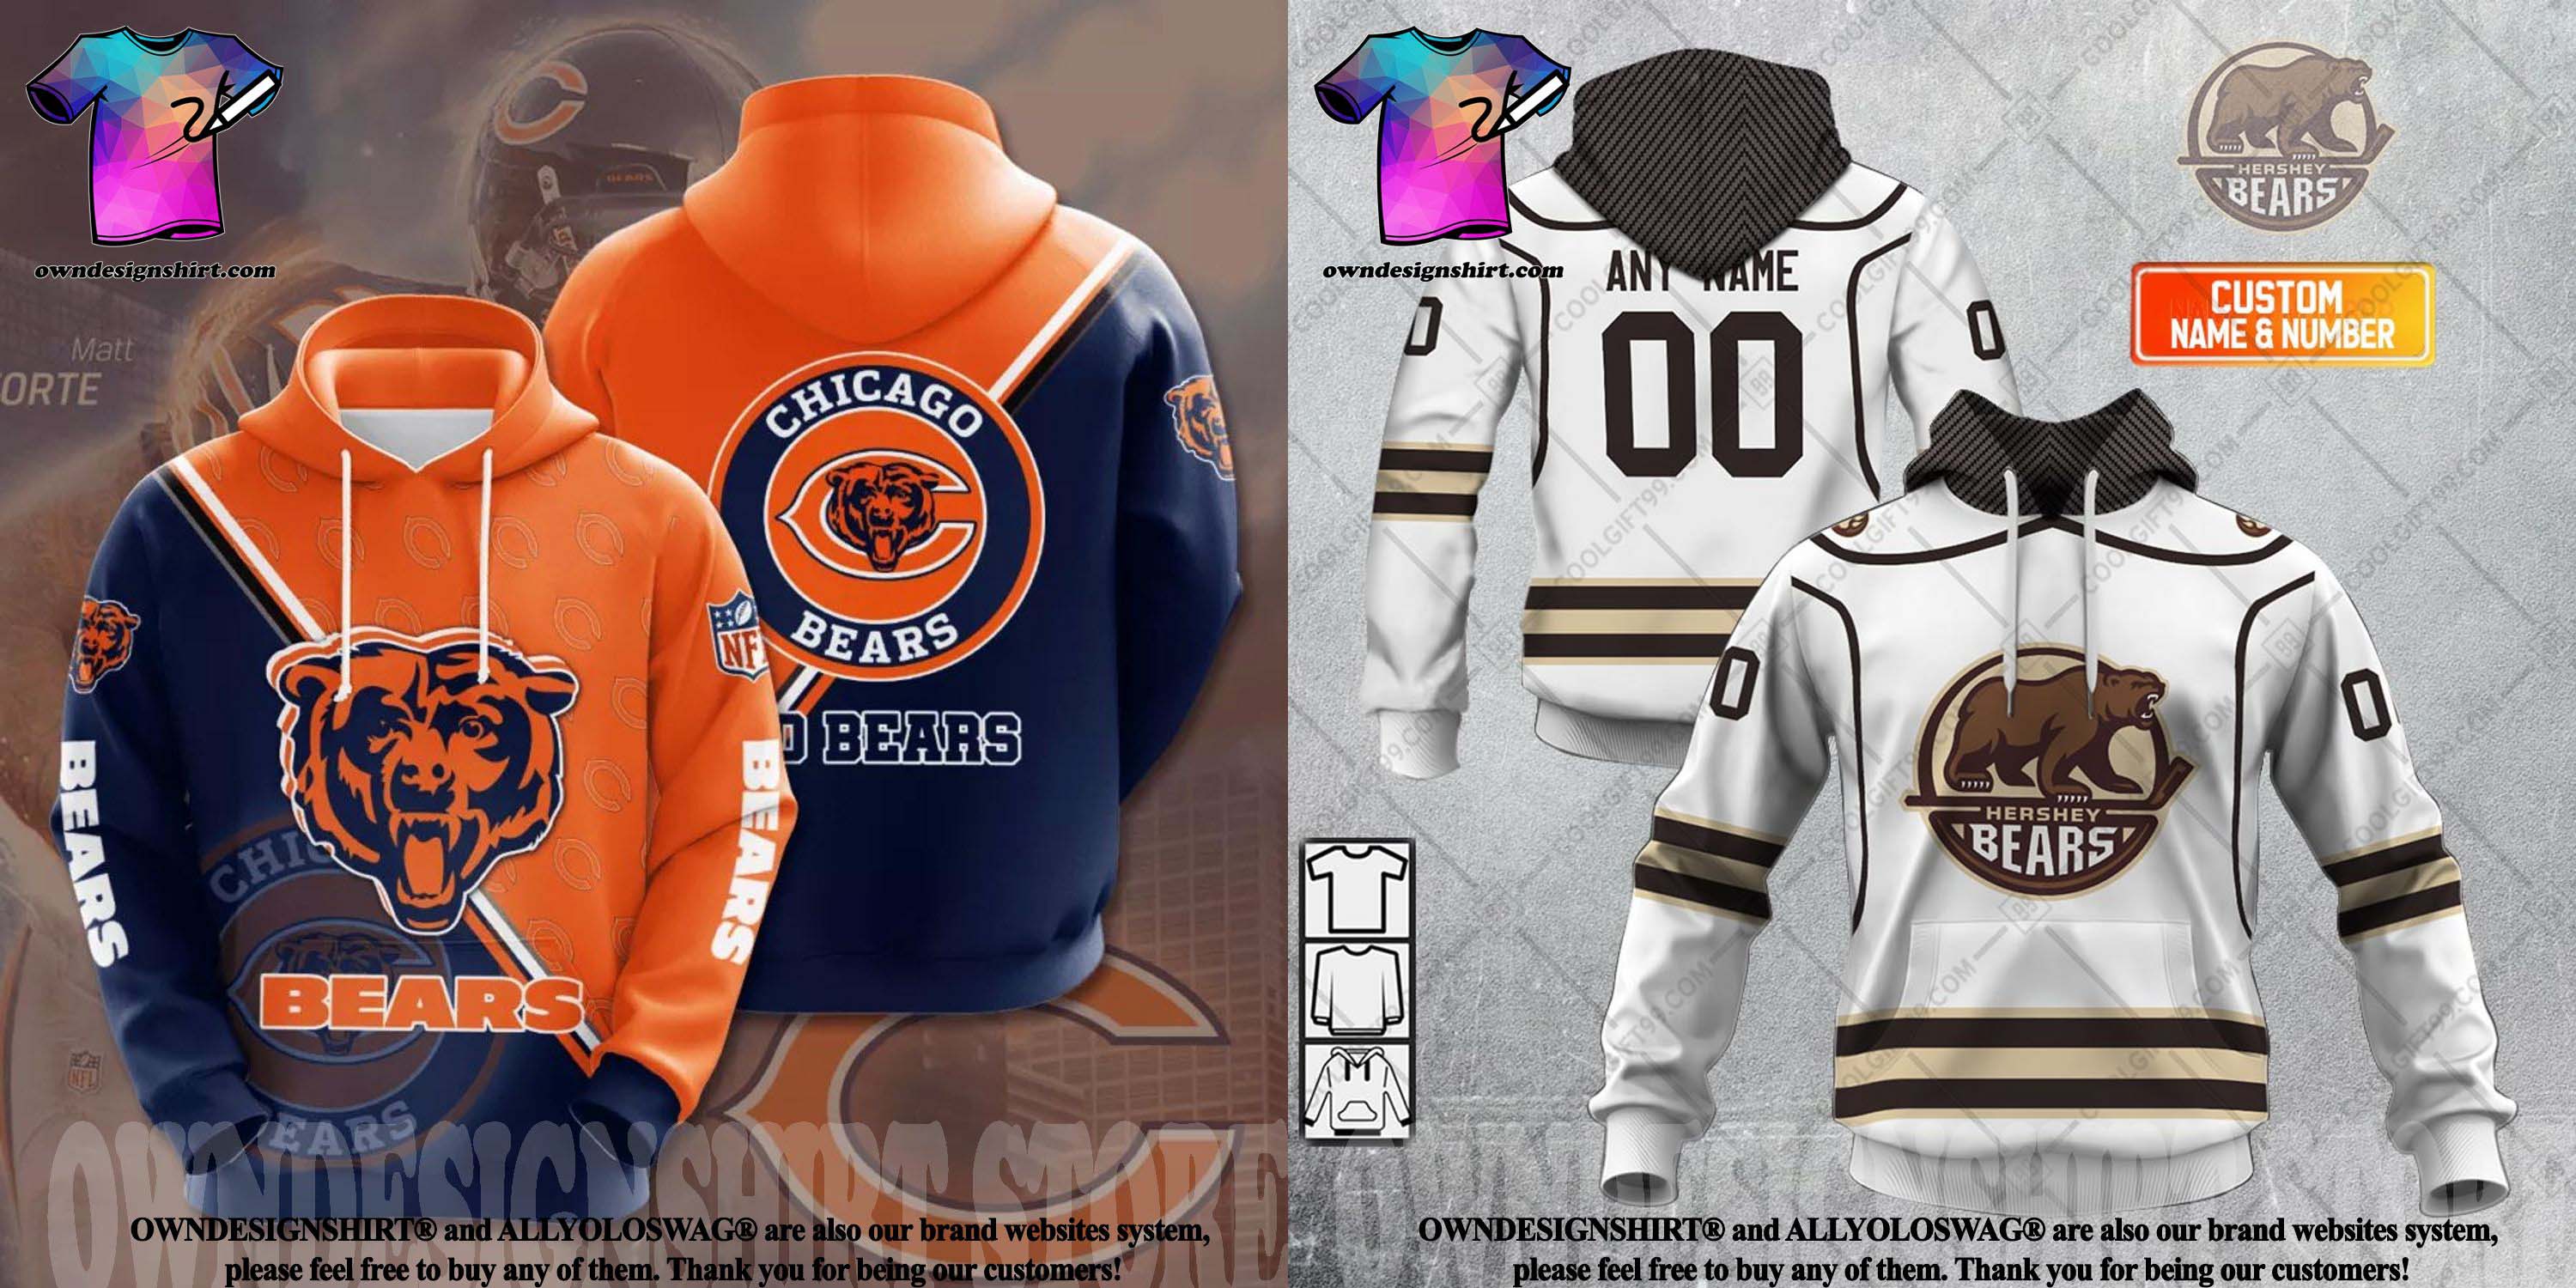 Learns about Chicago Bears rookie jersey numbers and Hershey Bears jersey